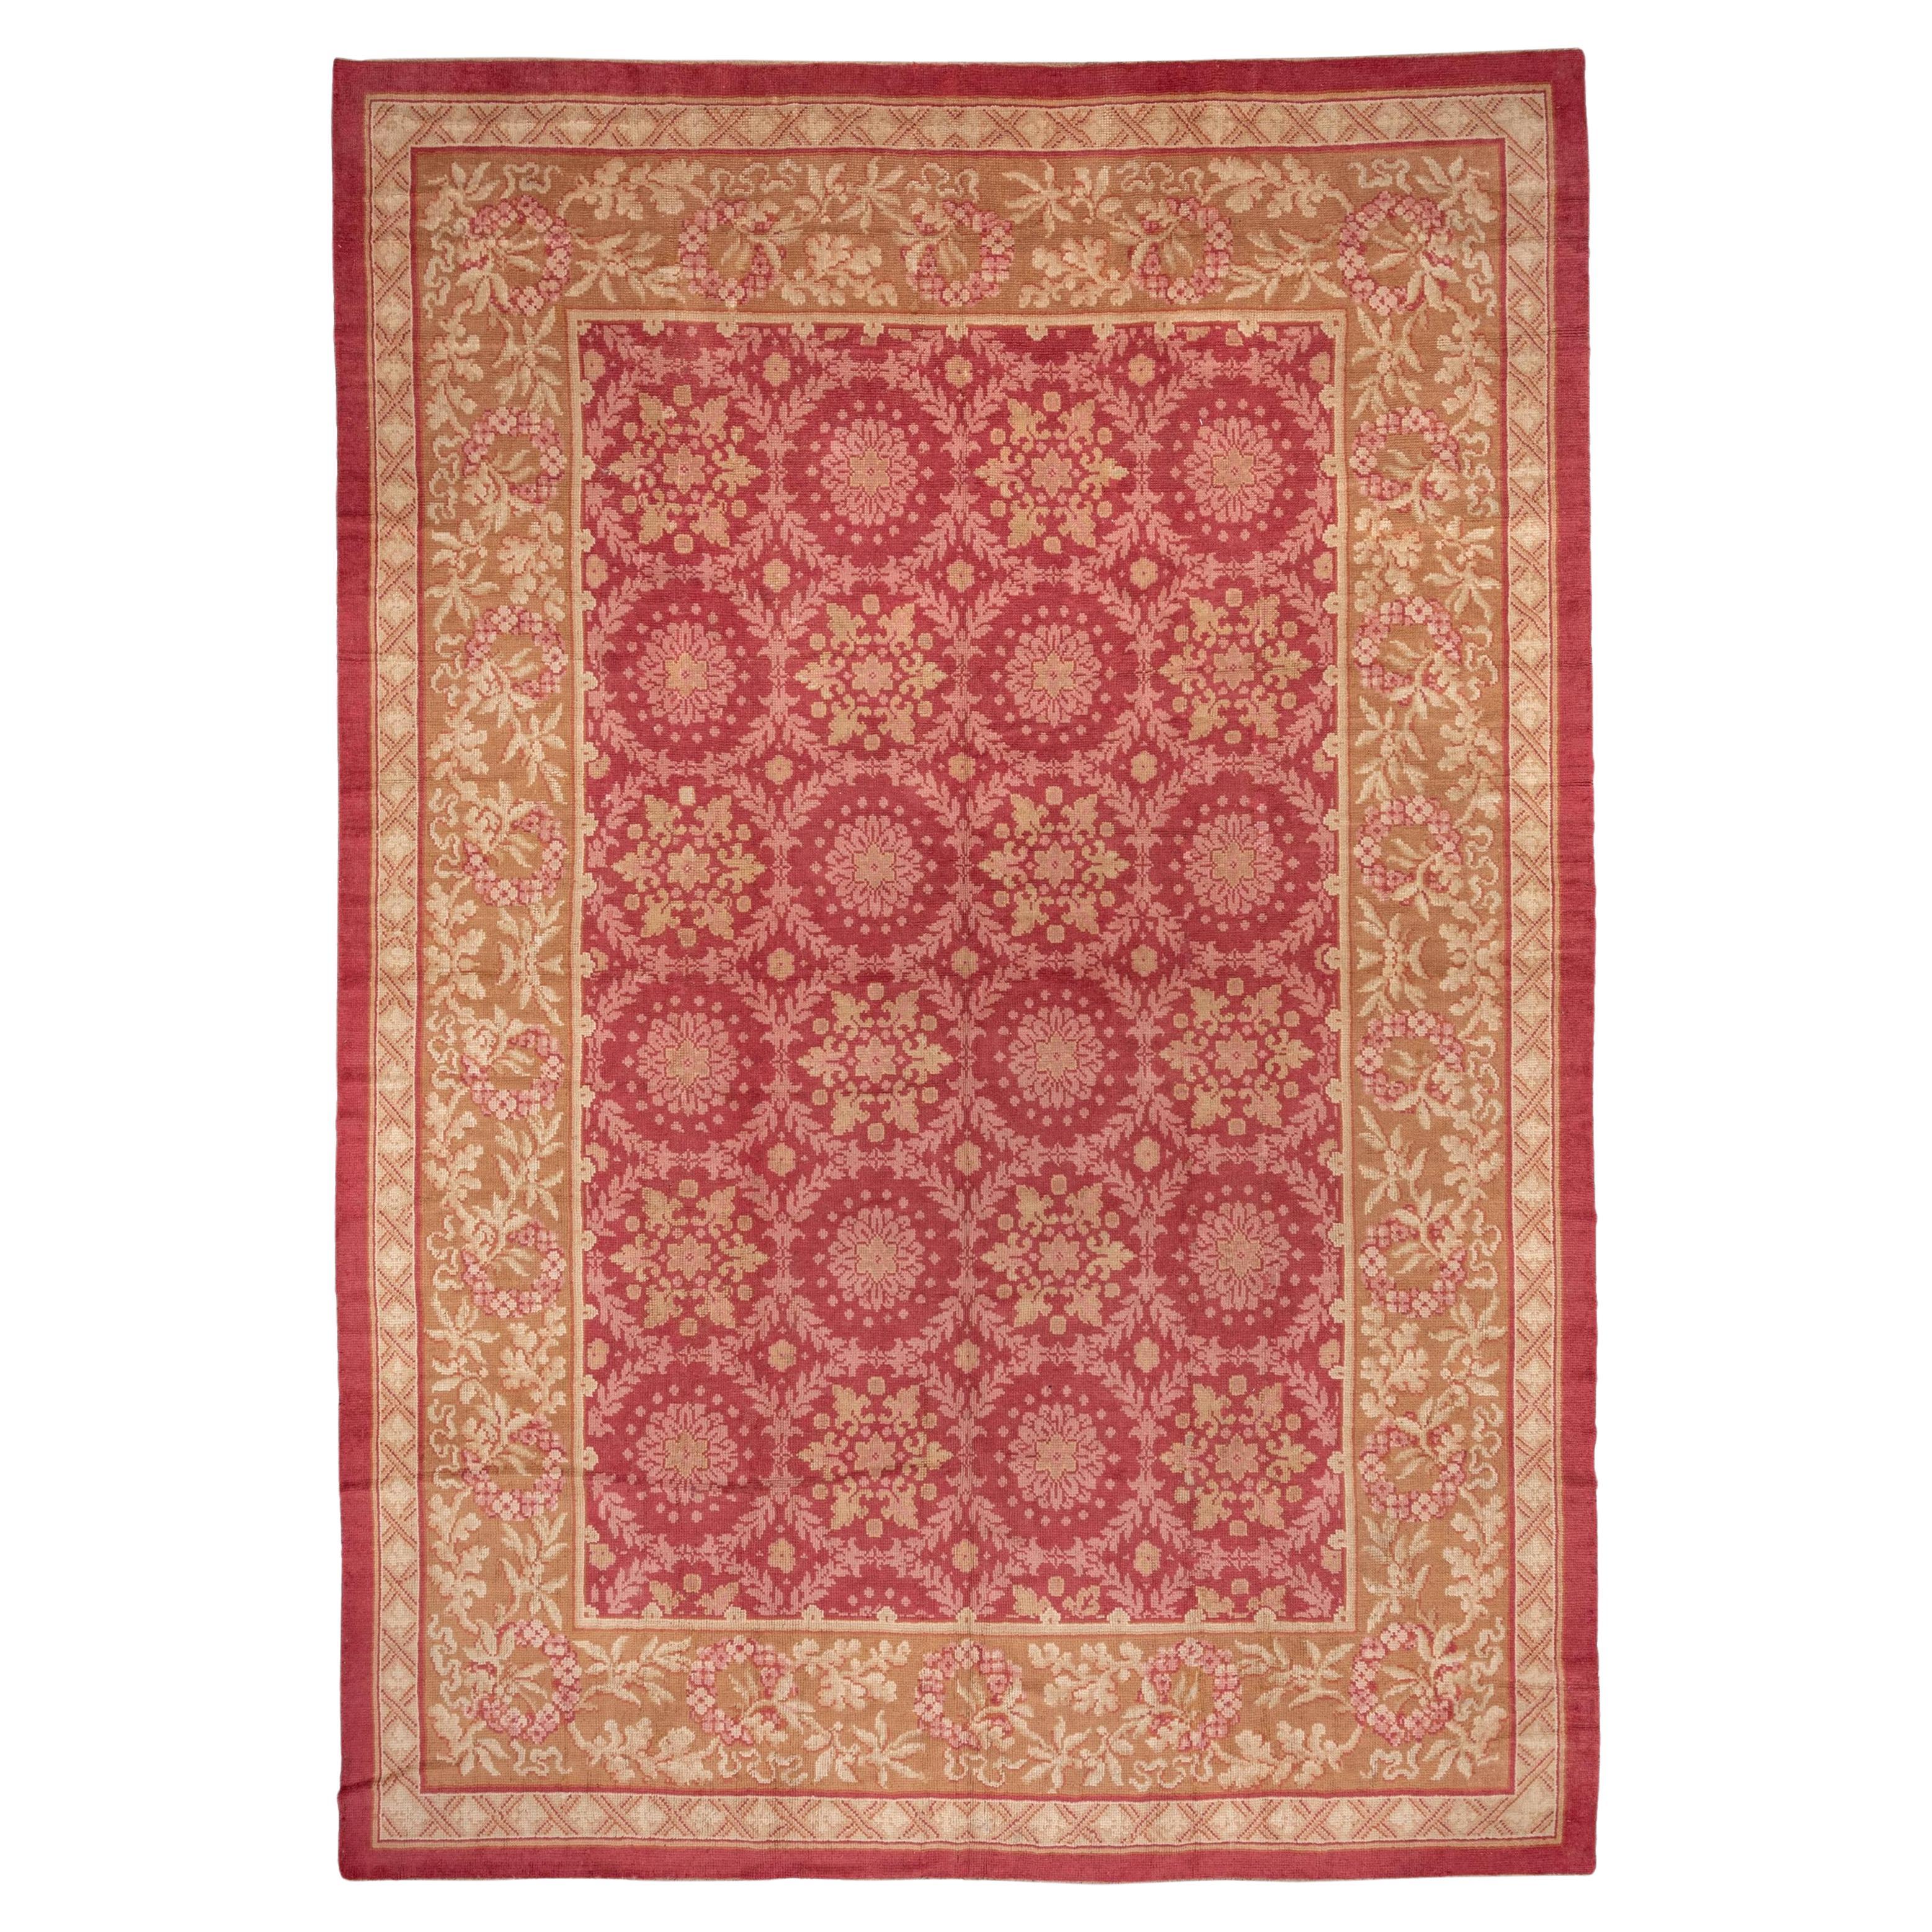 Antique French Savonnerie Carpet, Red Field